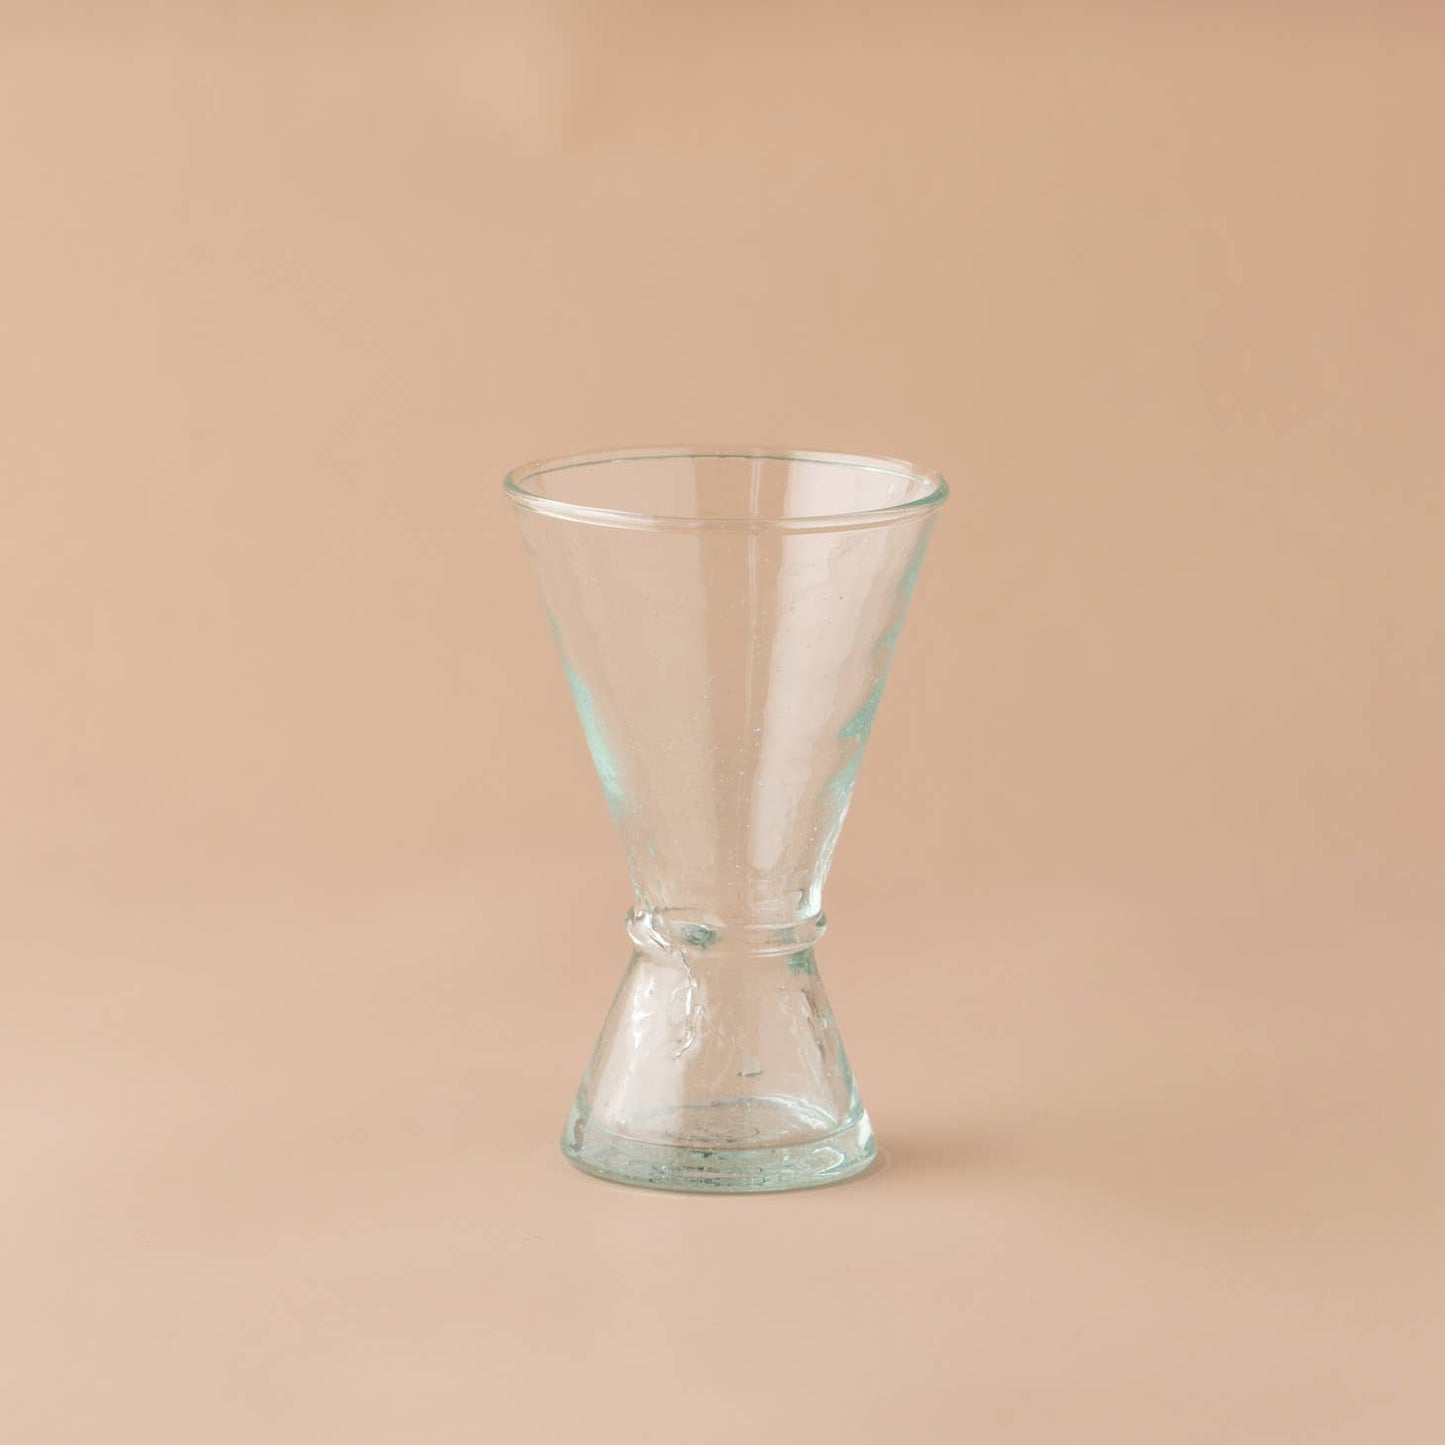 The unique sculptural shape of the wine glass is eye catching in its simplicity and brings out the best of your favorite wine and are ideal for entertaining. Handblown in morocco using local recycled glass, giving these materials another life.